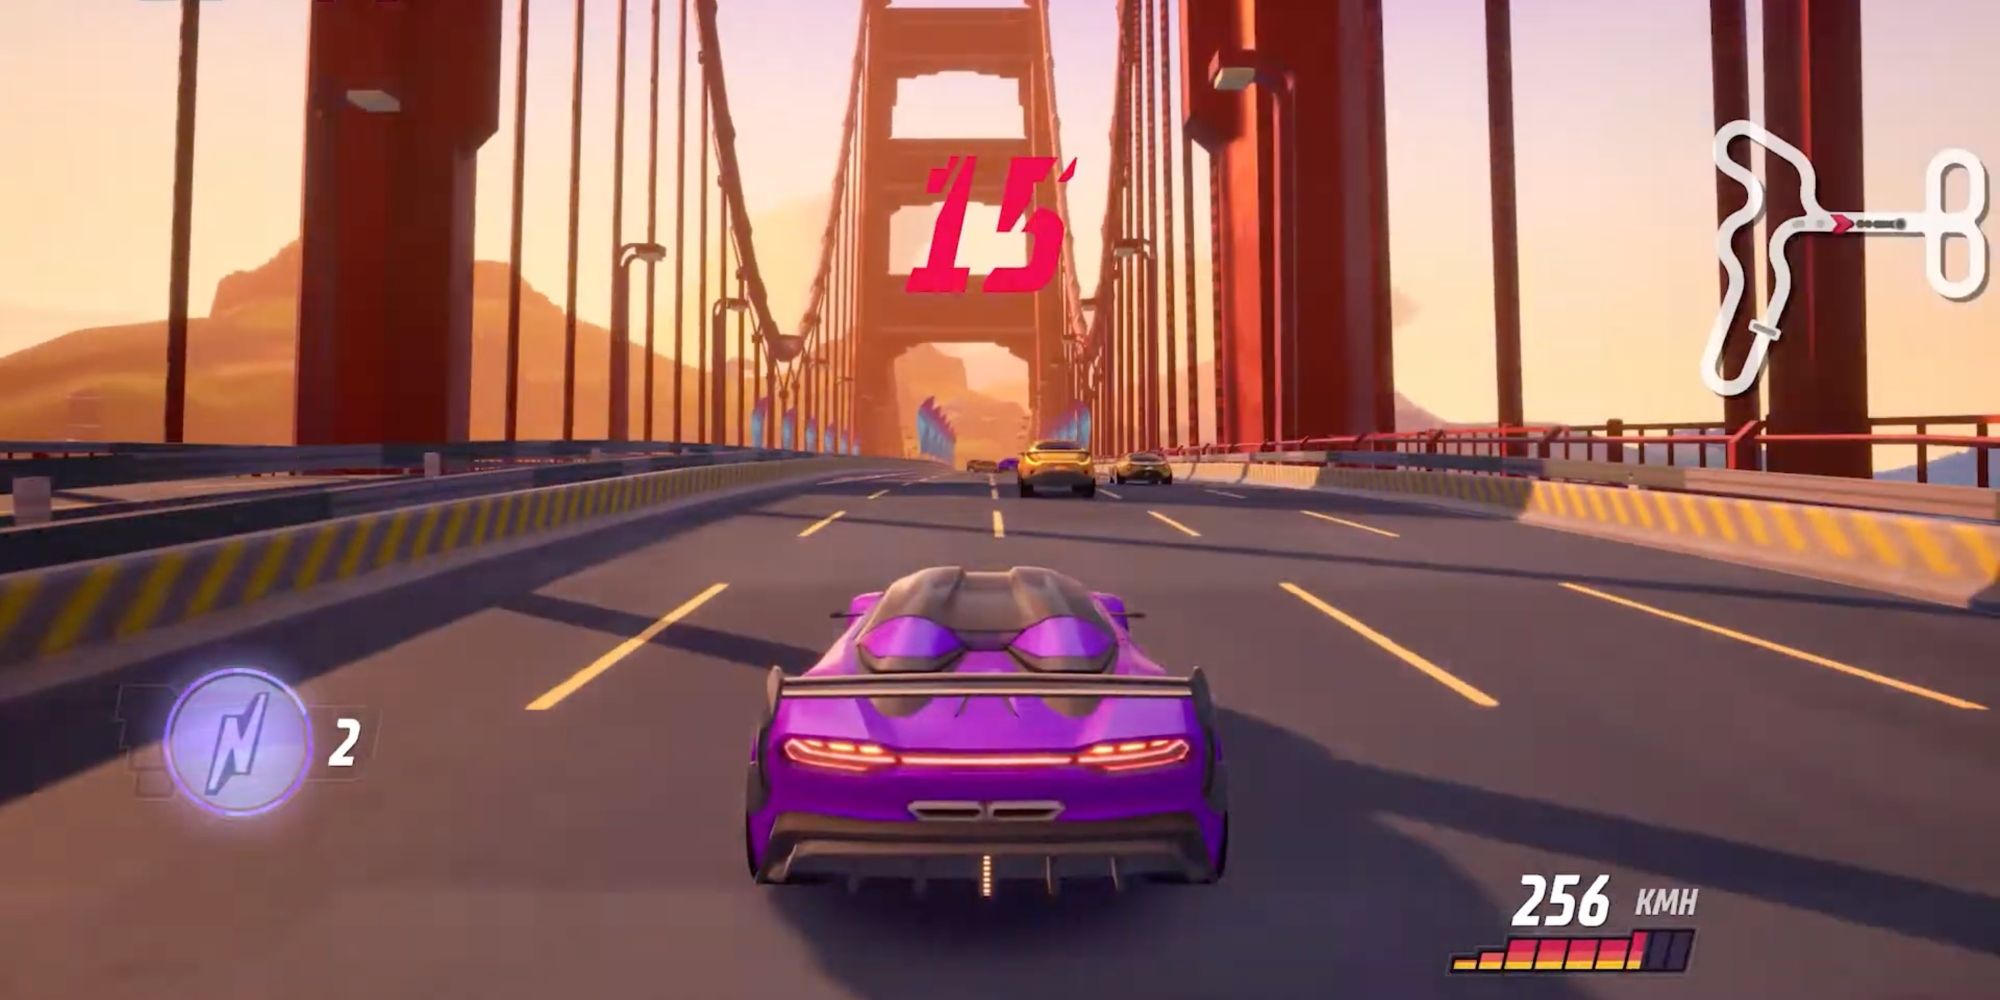 Player drives on a bridge to beat drivers at high speeds